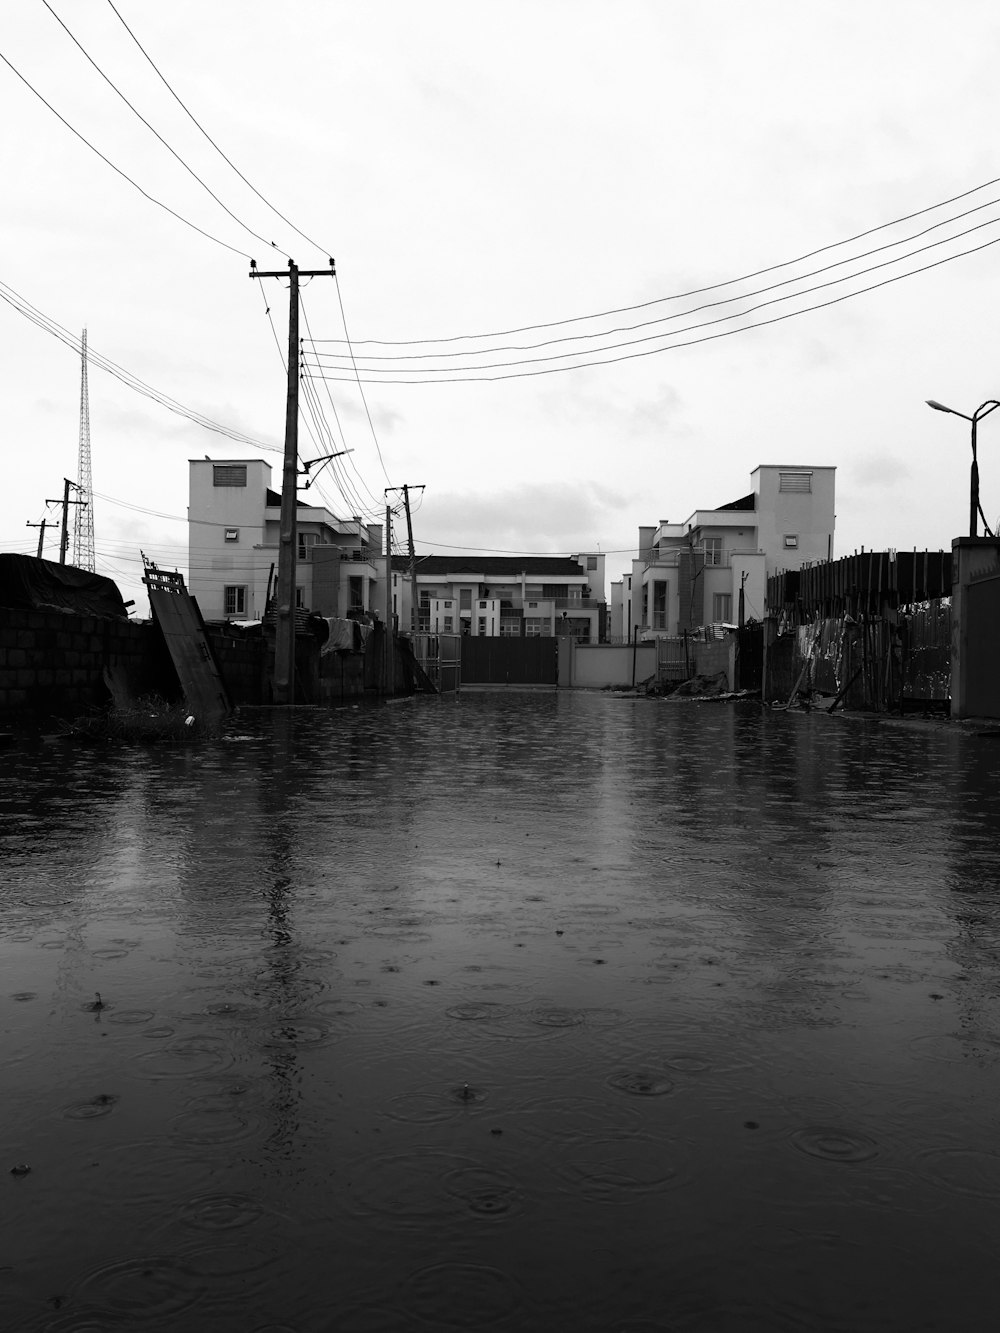 grayscale photo of buildings near body of water